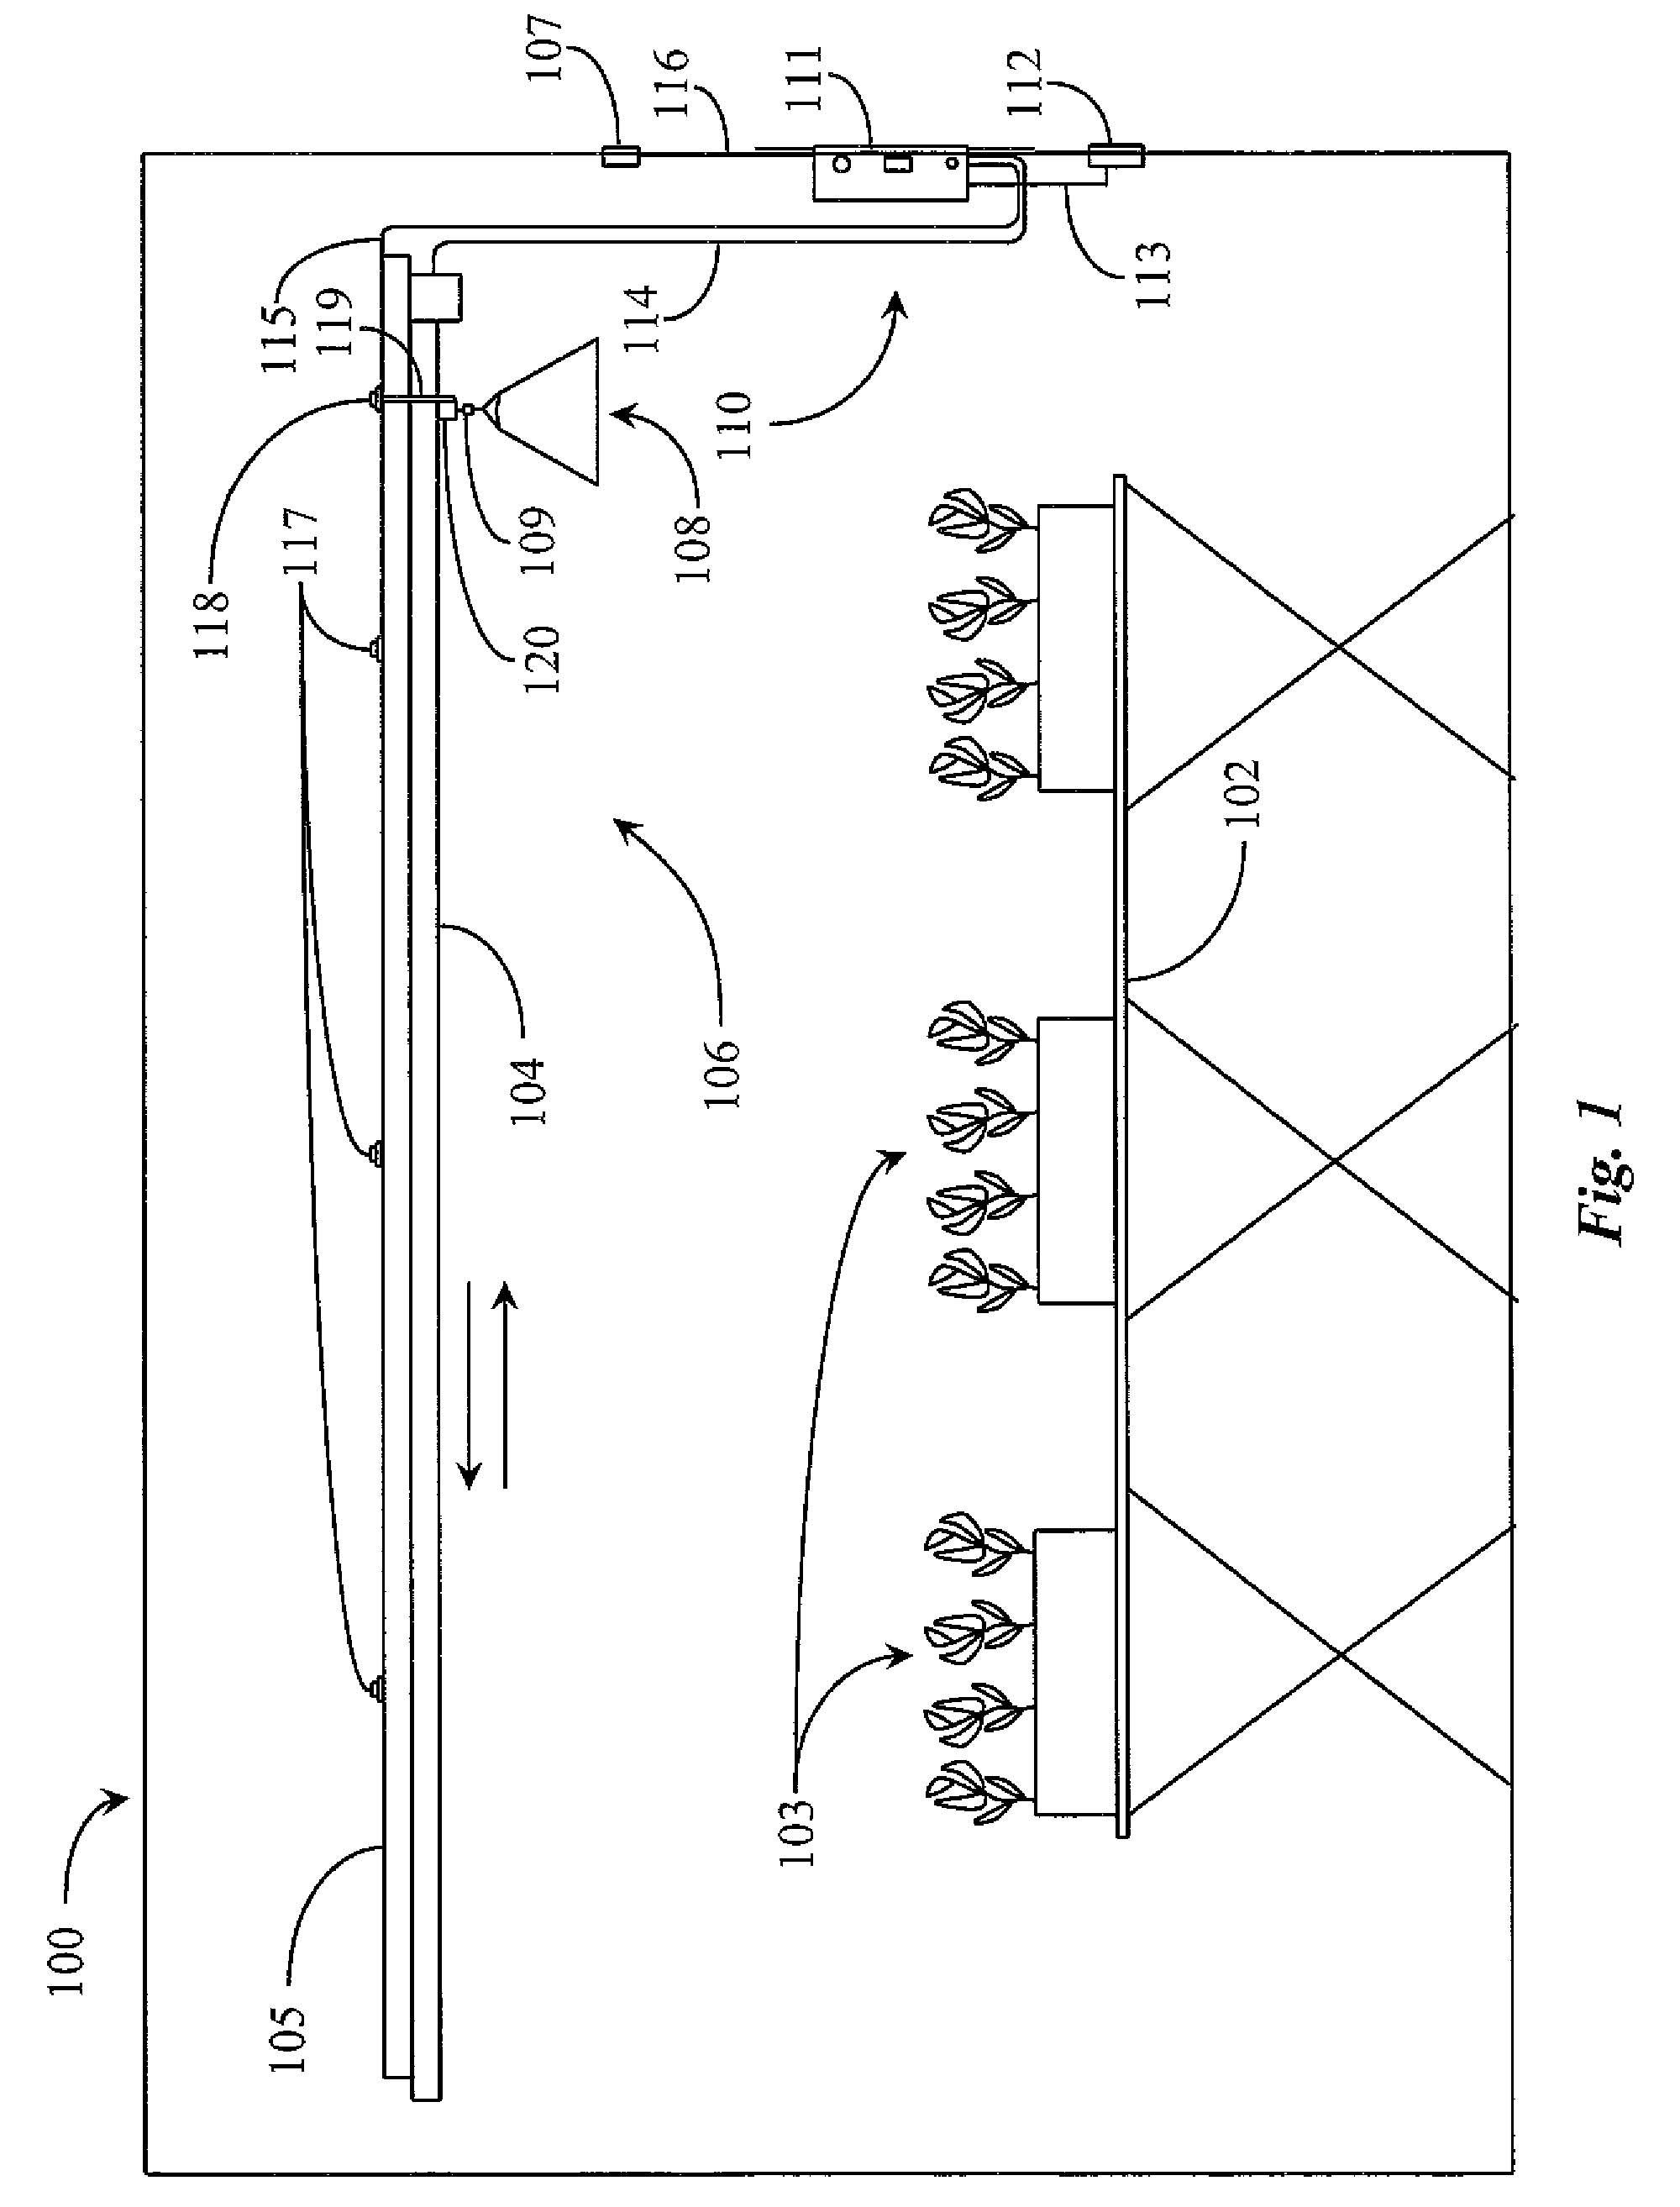 System and methods for controlling movement of a track light system